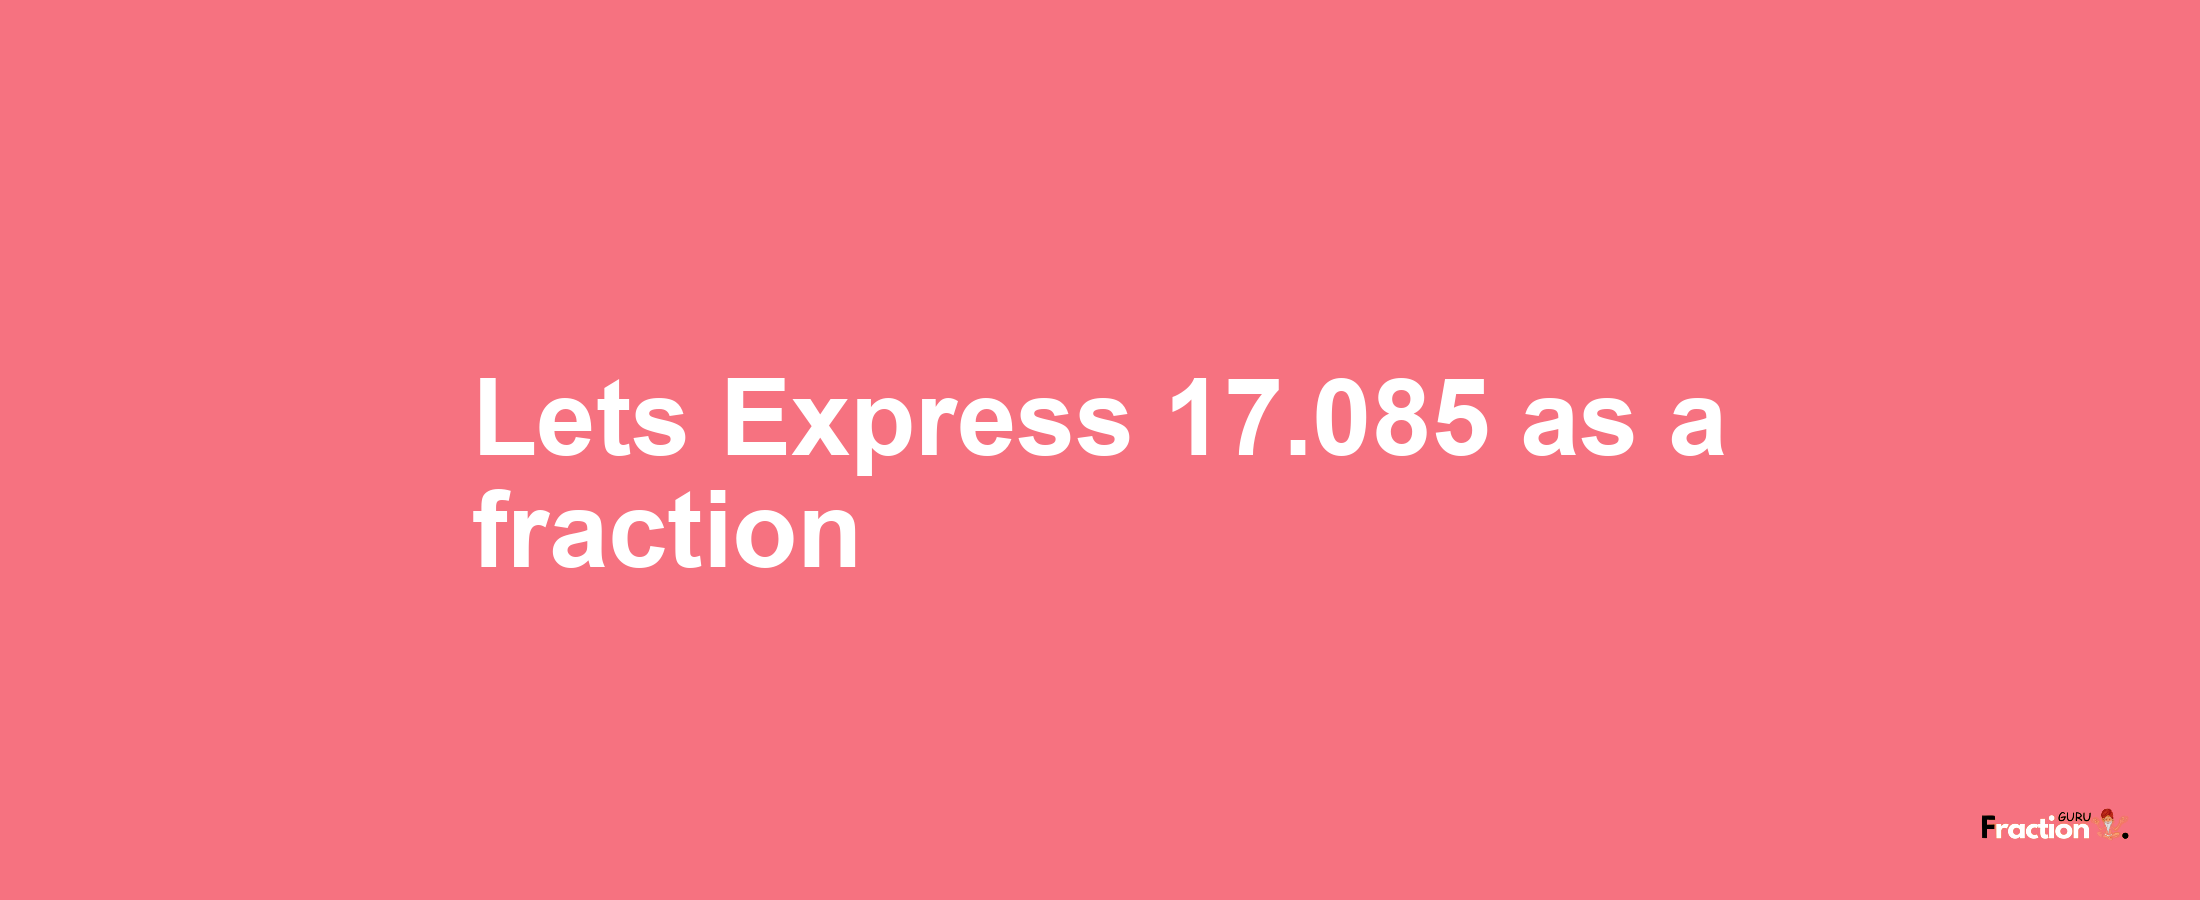 Lets Express 17.085 as afraction